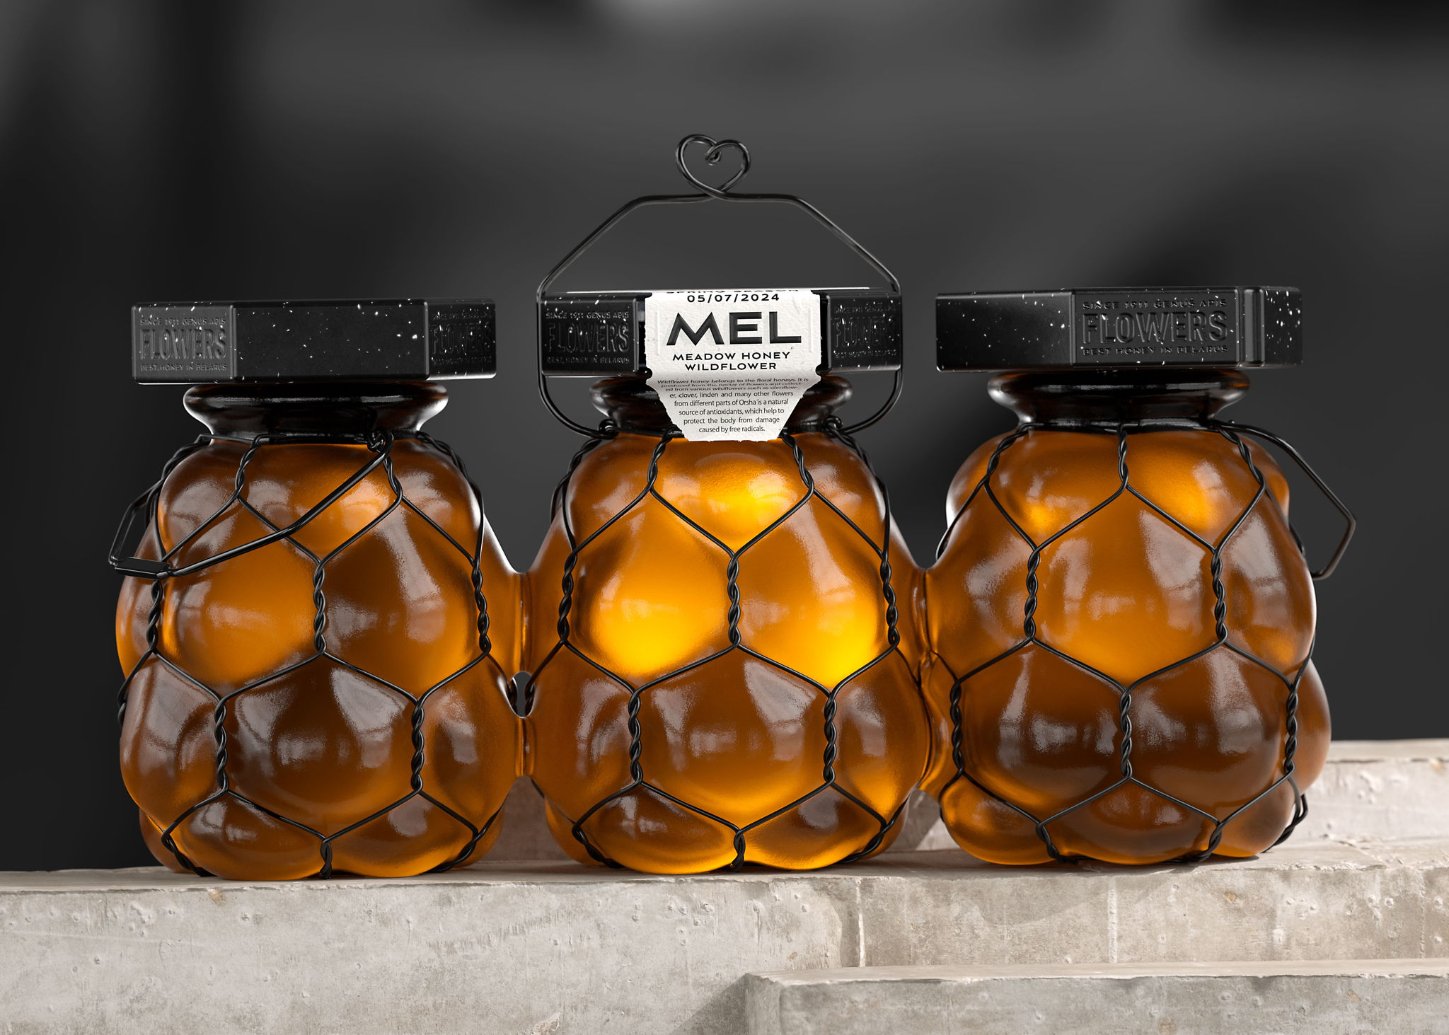 Pack of the Month: Mel Honey’s Conceptual Bulbous Structure Celebrates the Art of Glass Blowing